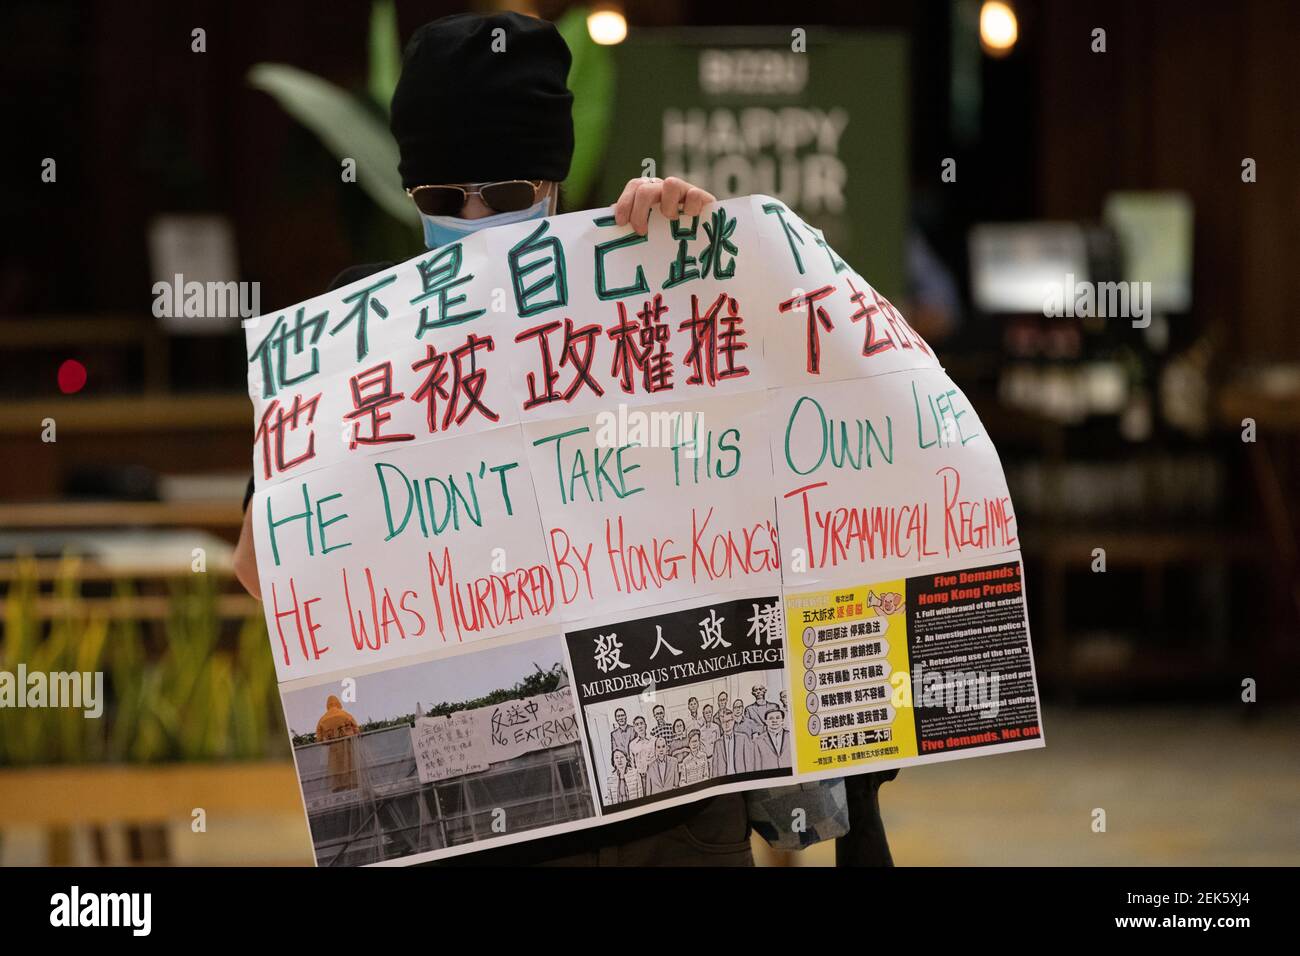 Pro Democracy supporters hold Hong Kong Independence signs and chant slogans such as 'One Nation, One Hong Kong' as members of the public queue for hours to pay respects to Marco Leung Ling-kit in Hong Kong Hong Kong, S.A.R., June 06, 2020. Marco Leung Ling-kit fell to his death on, June 15, 2019. (Photo by Simon Jankowski/Sipa USA) Stock Photo